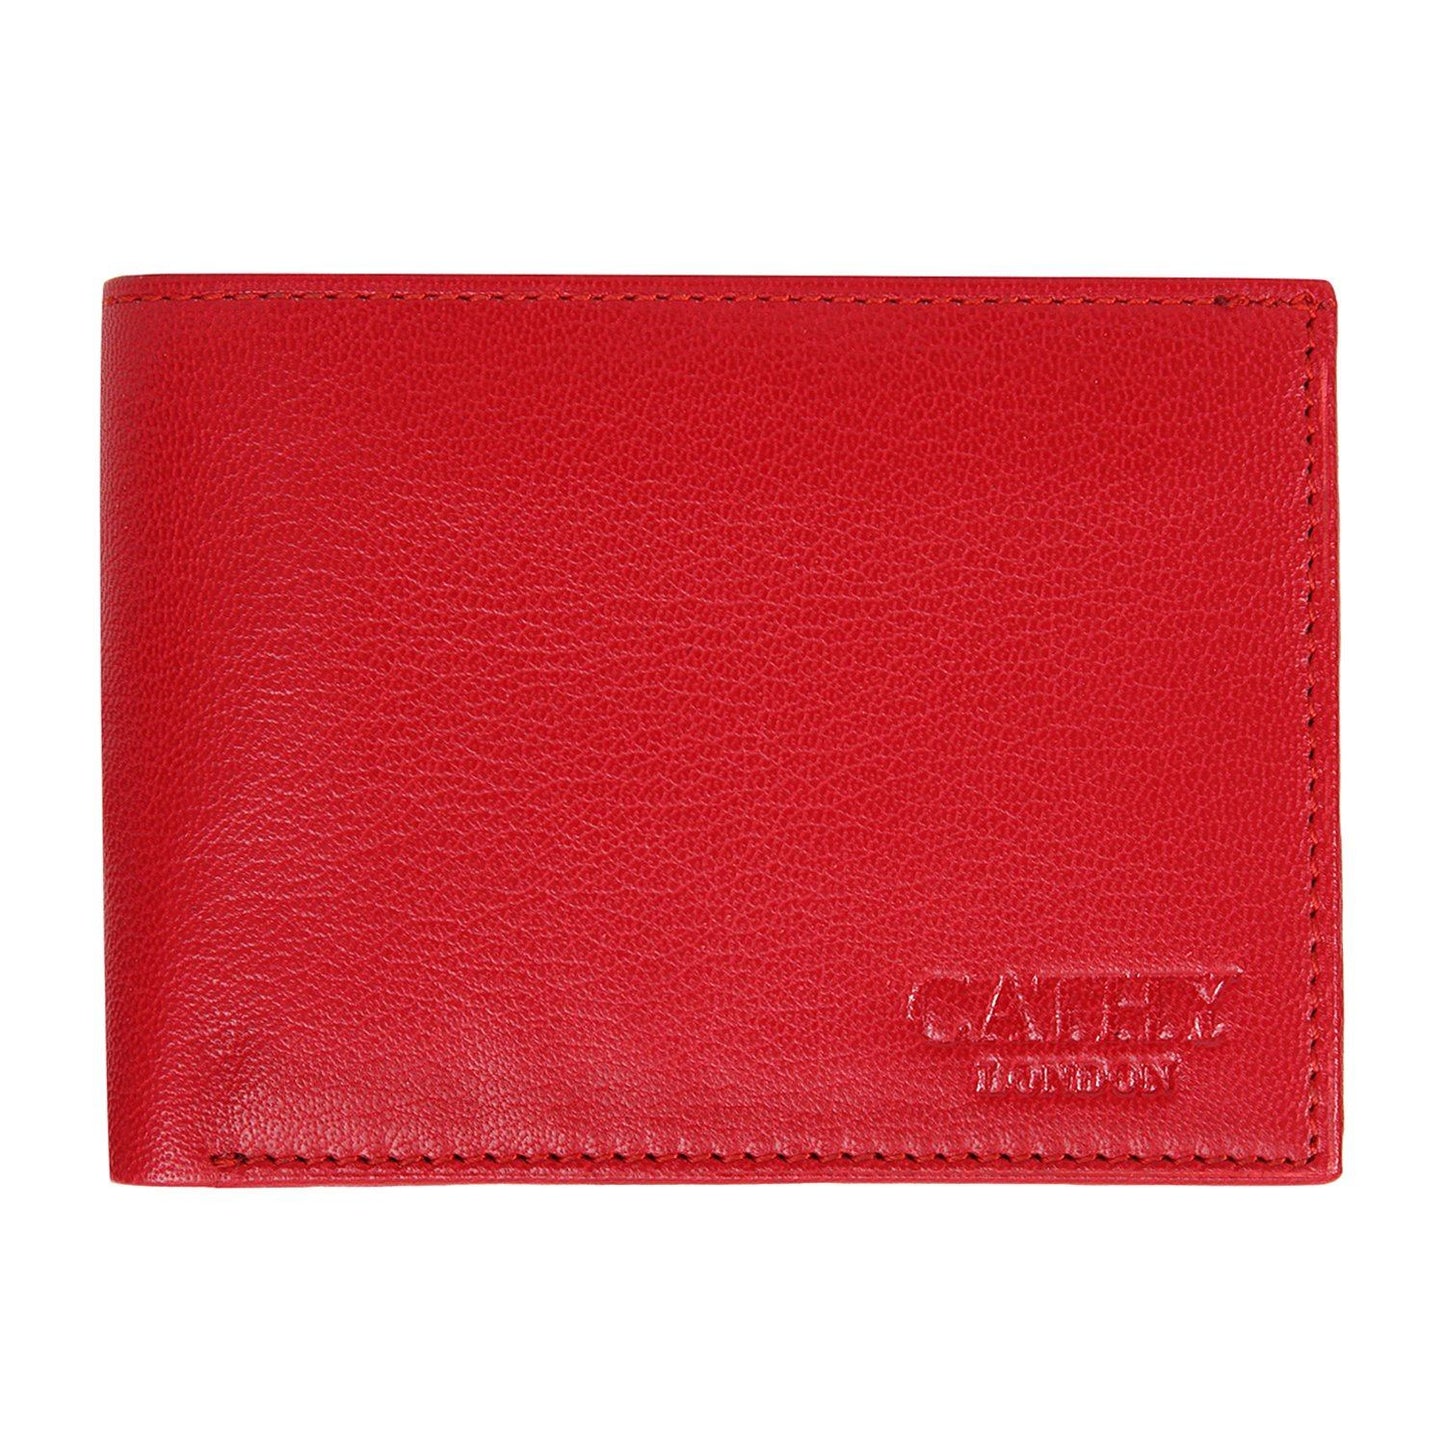 Red Colour Bi-Fold Italian Leather Slim Wallet ( 8 Card Slot + 2 ID Slot + 2 Hidden Compartment + Cash Compartment) Cathy London 